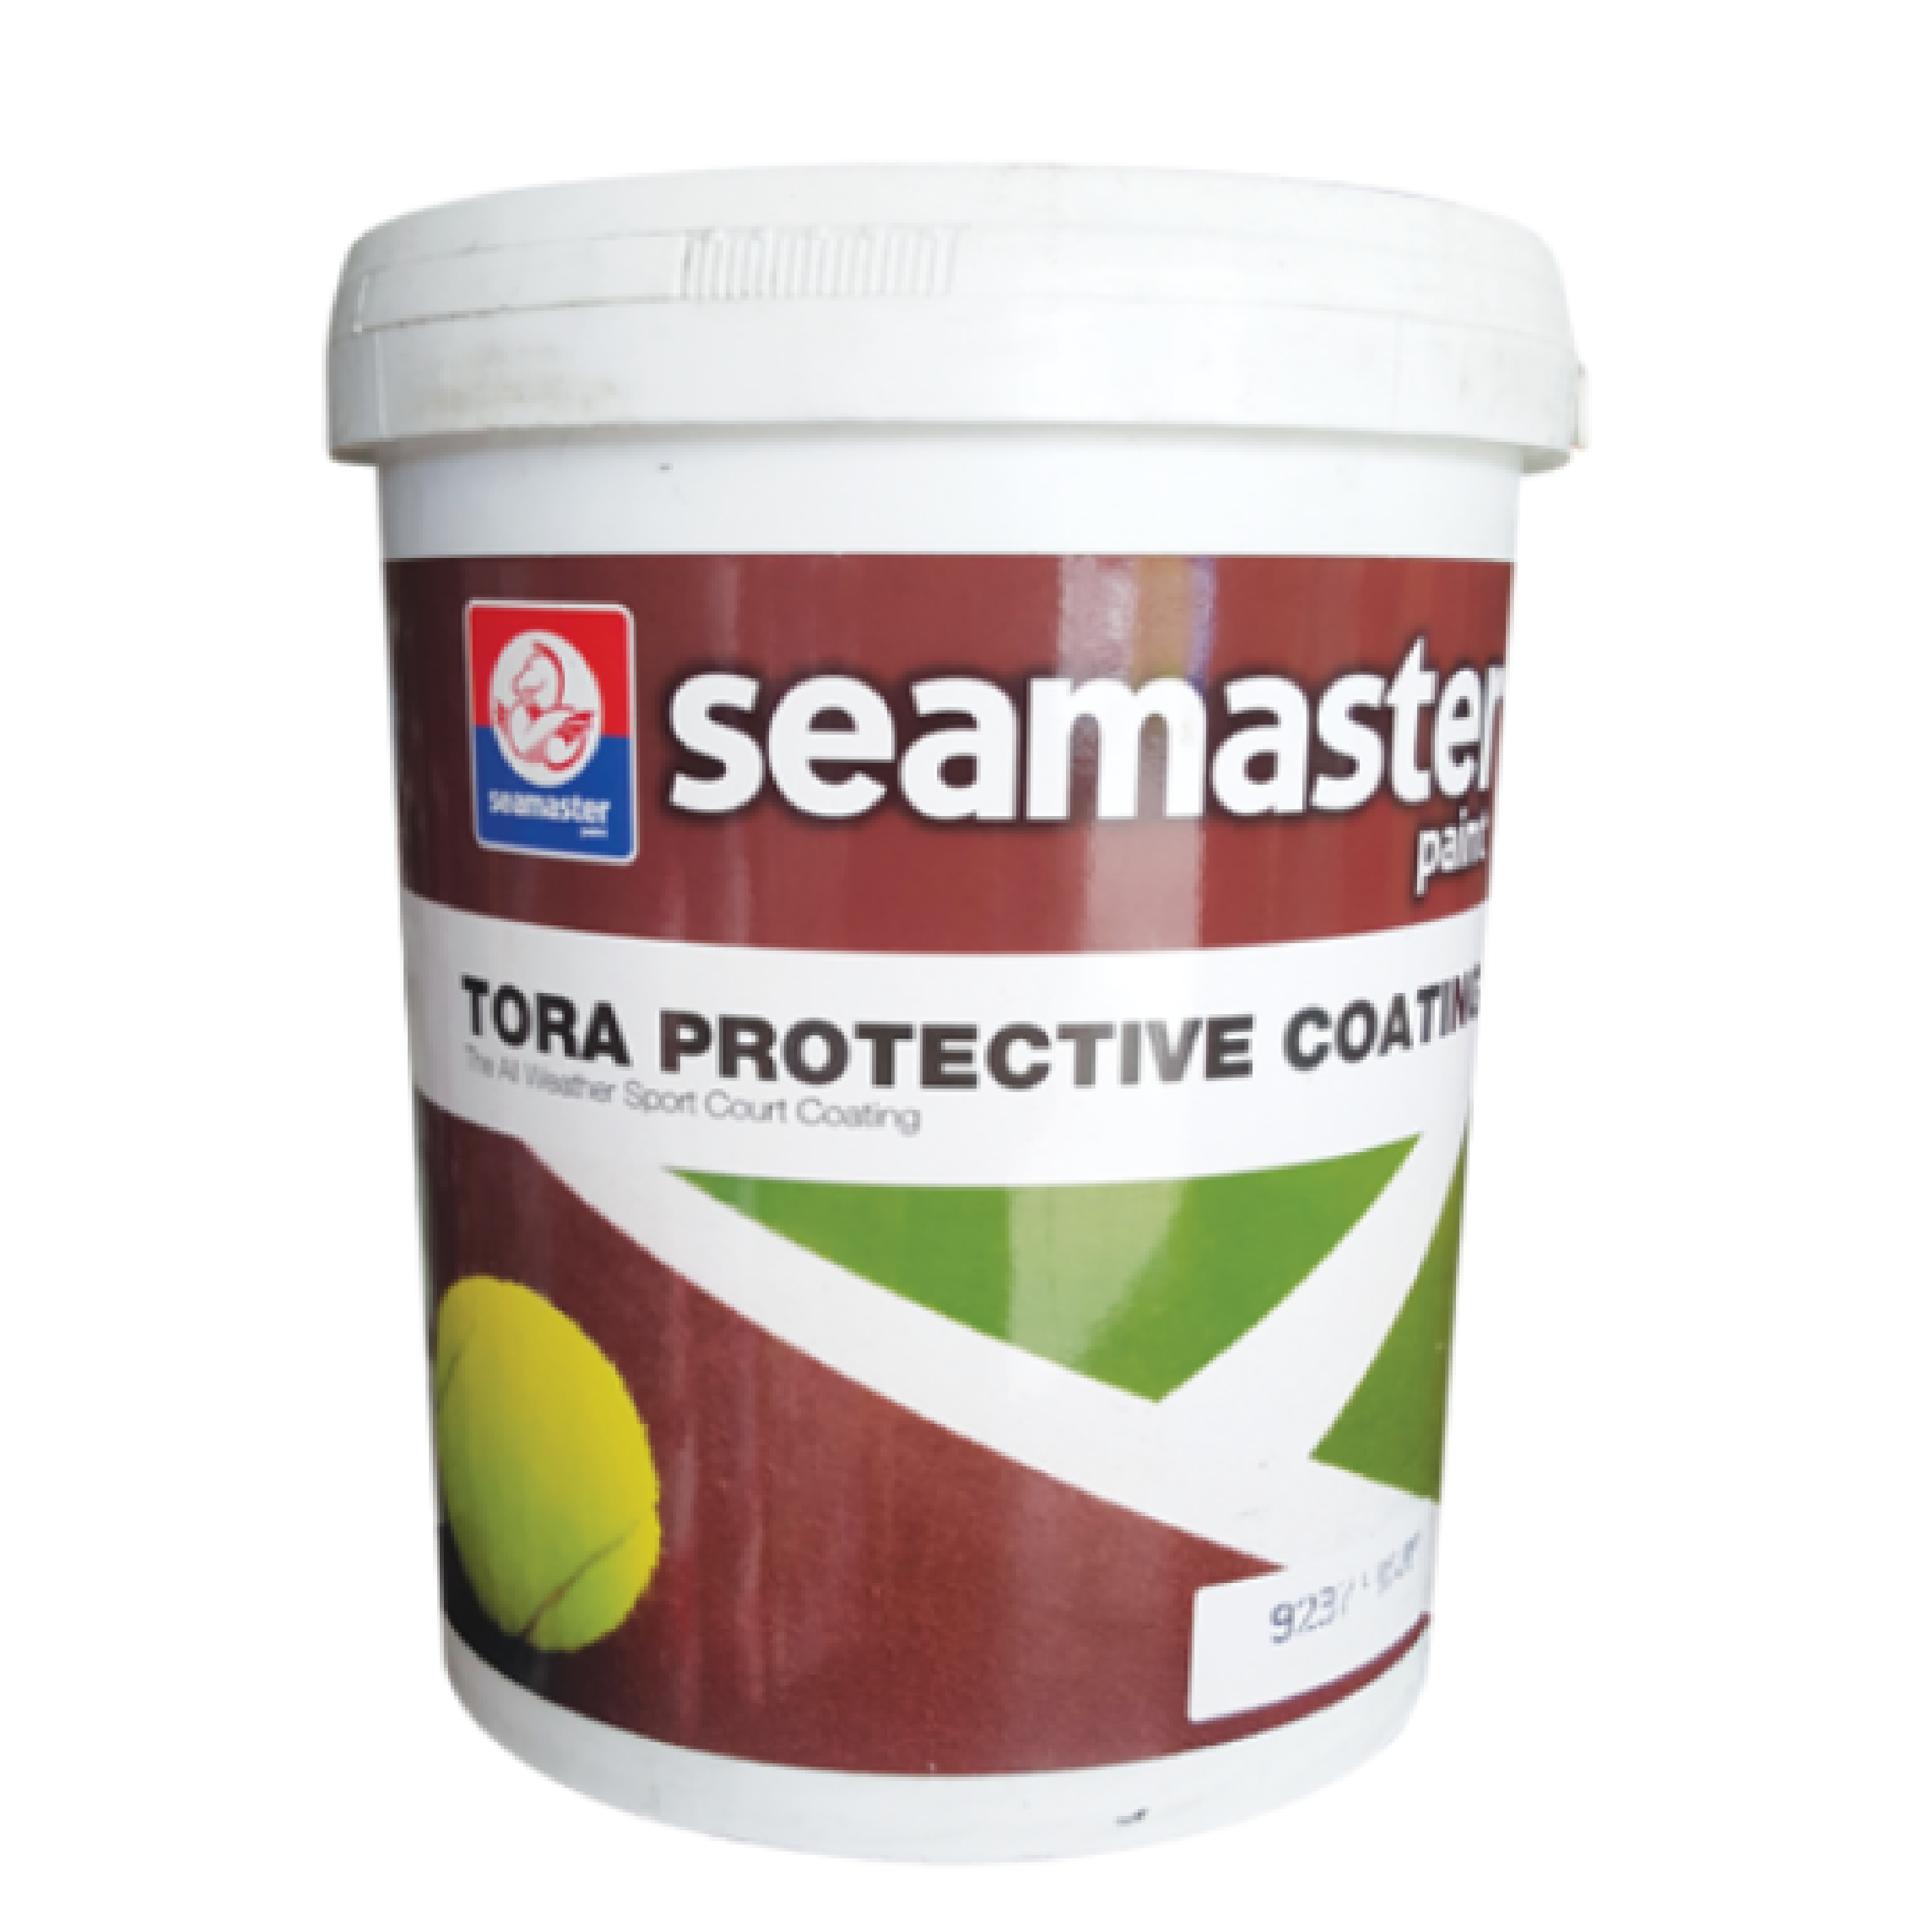 Seamaster TORA SPORTS COURT Protective Coating 9200 ALL WEATHER 5L